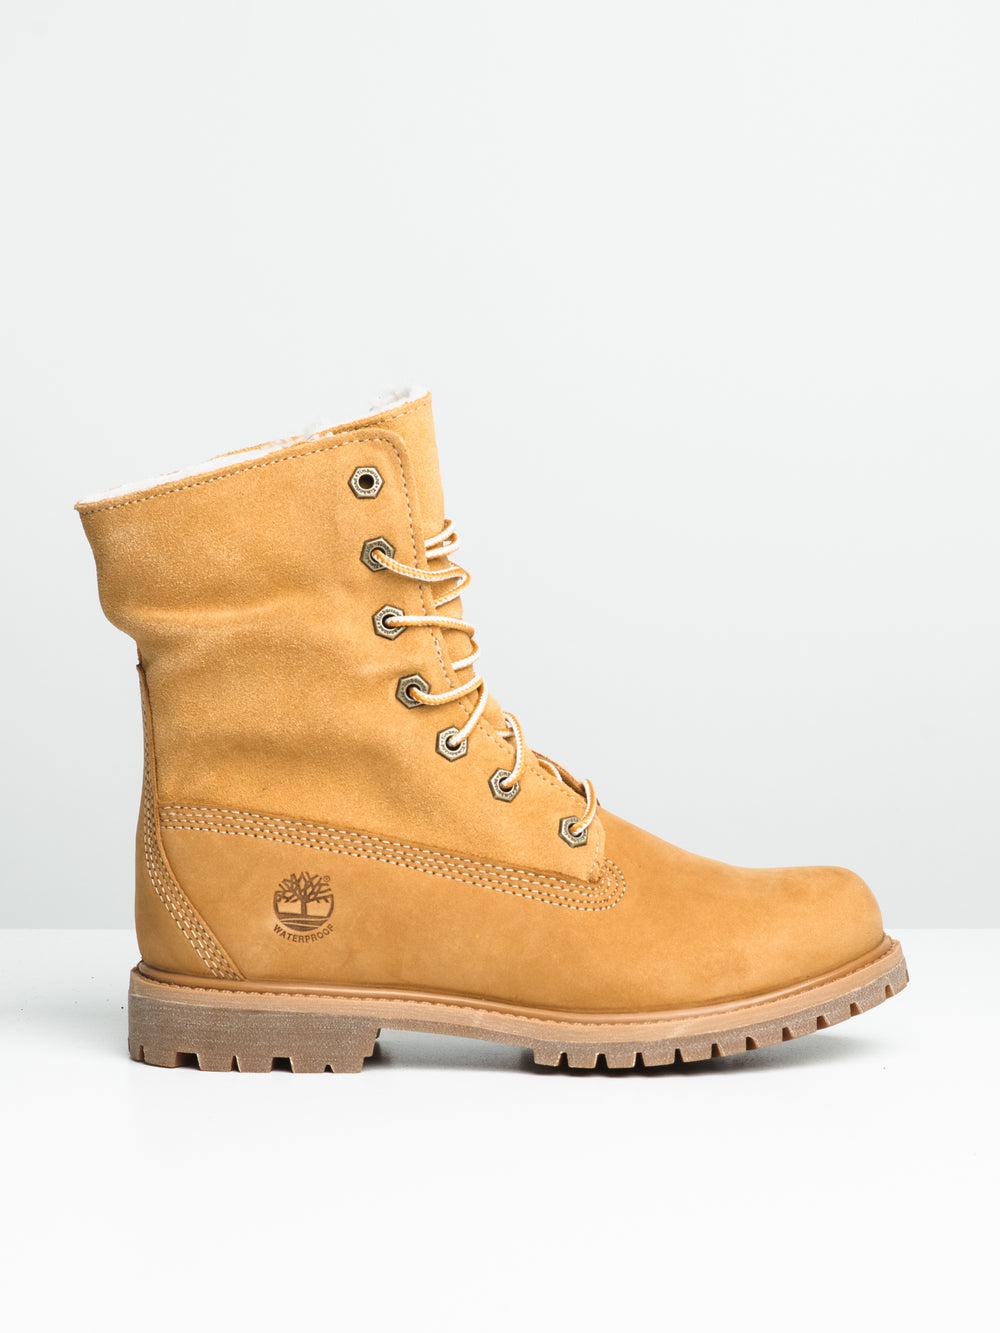 Timberland Boots for Women | Shoe Carnival